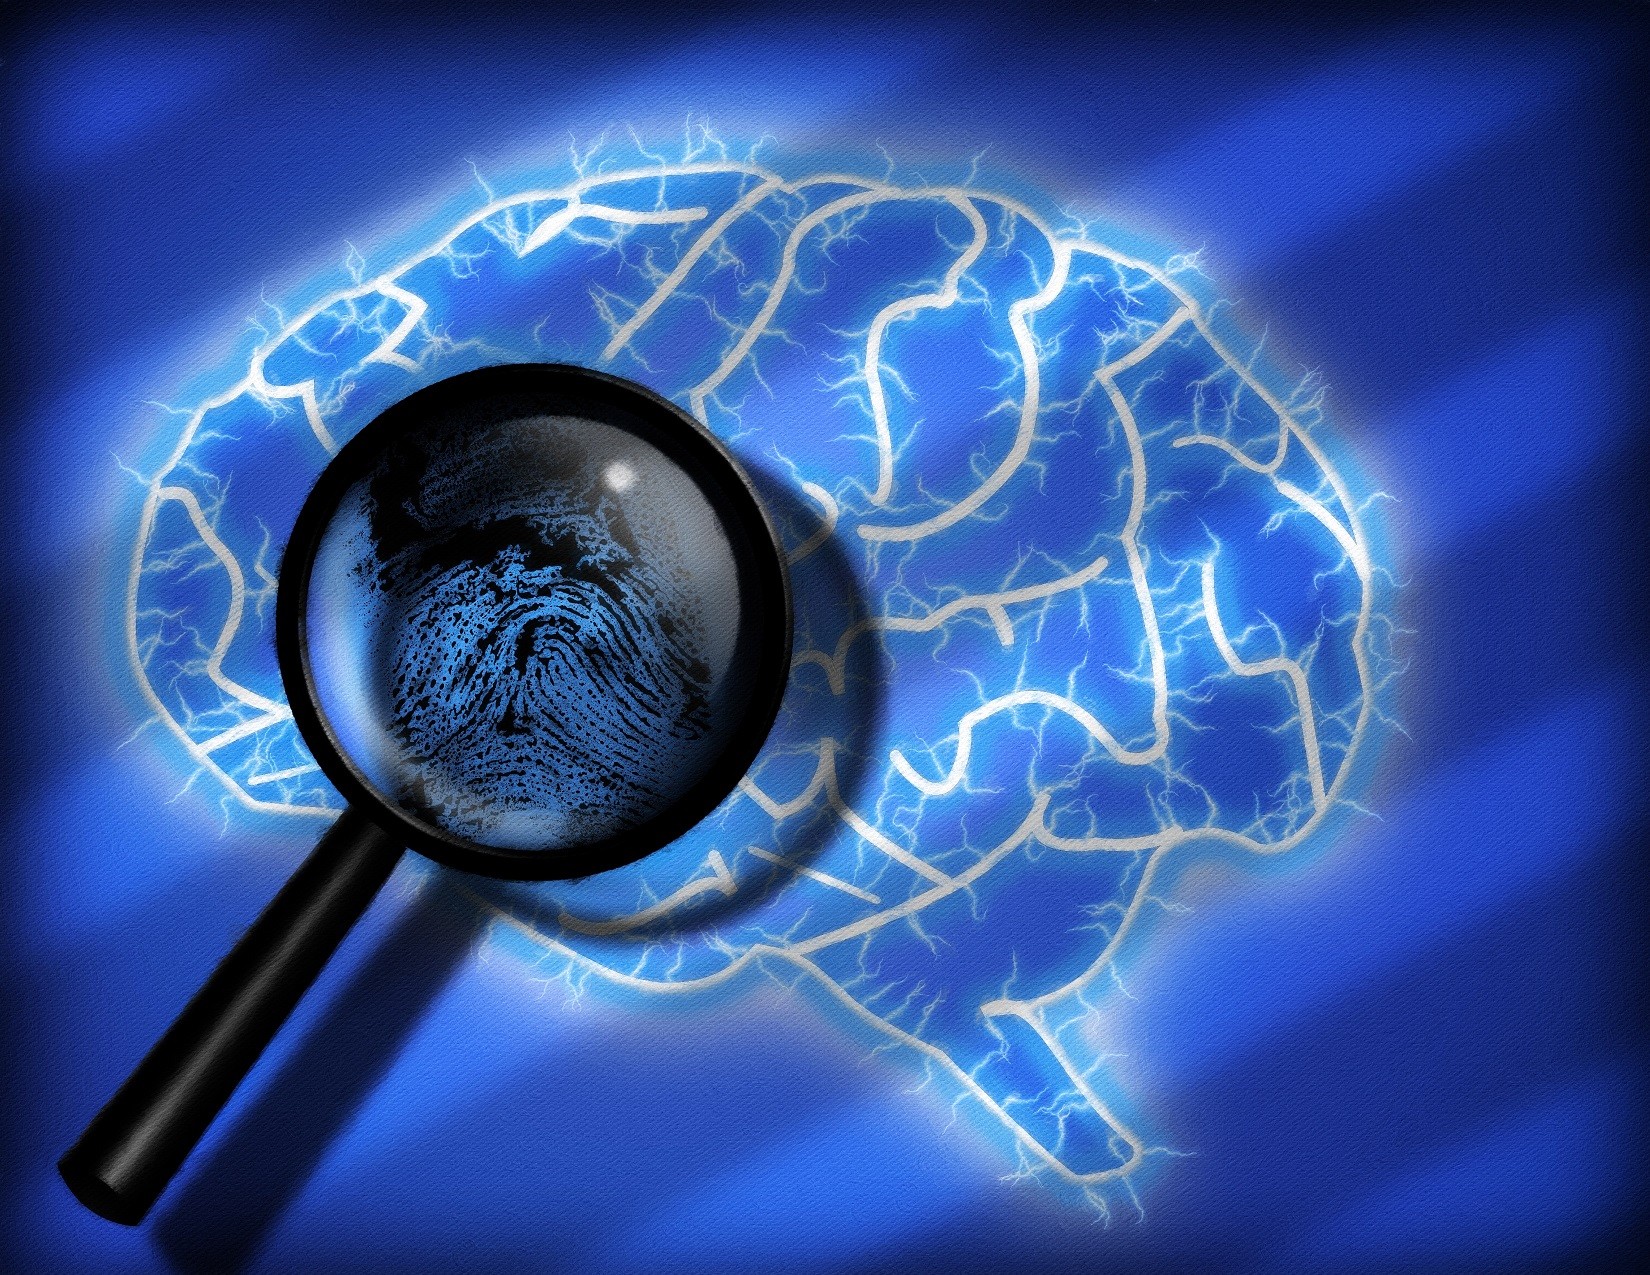 image of a magnifying glass over a brain with a fingeprint